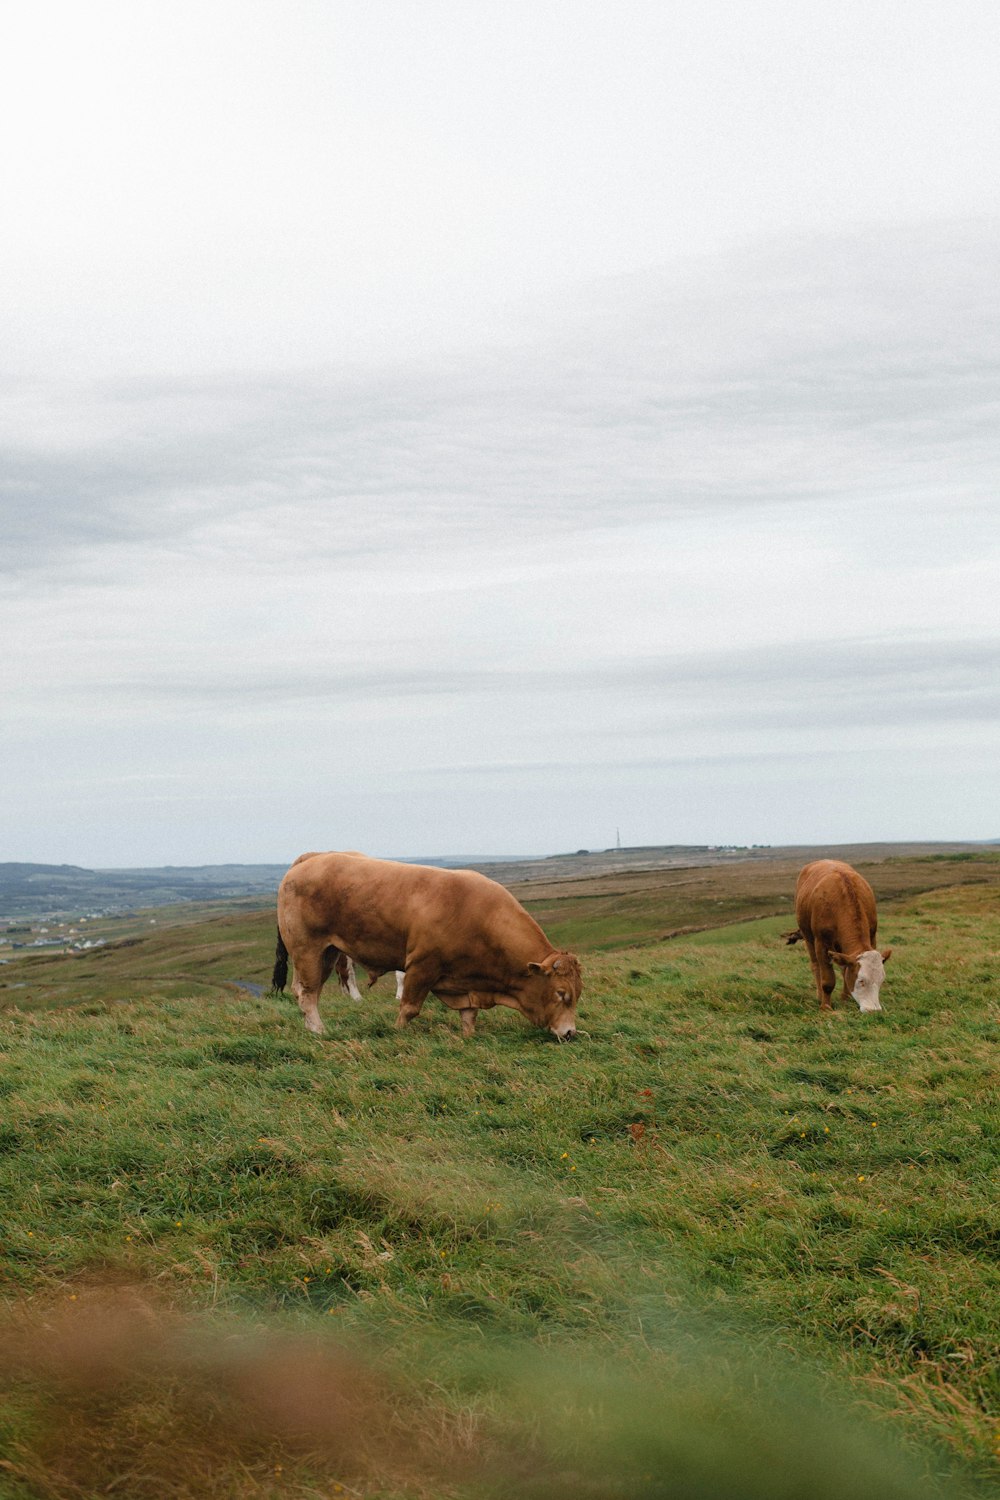 two cows grazing in a grassy field on a cloudy day